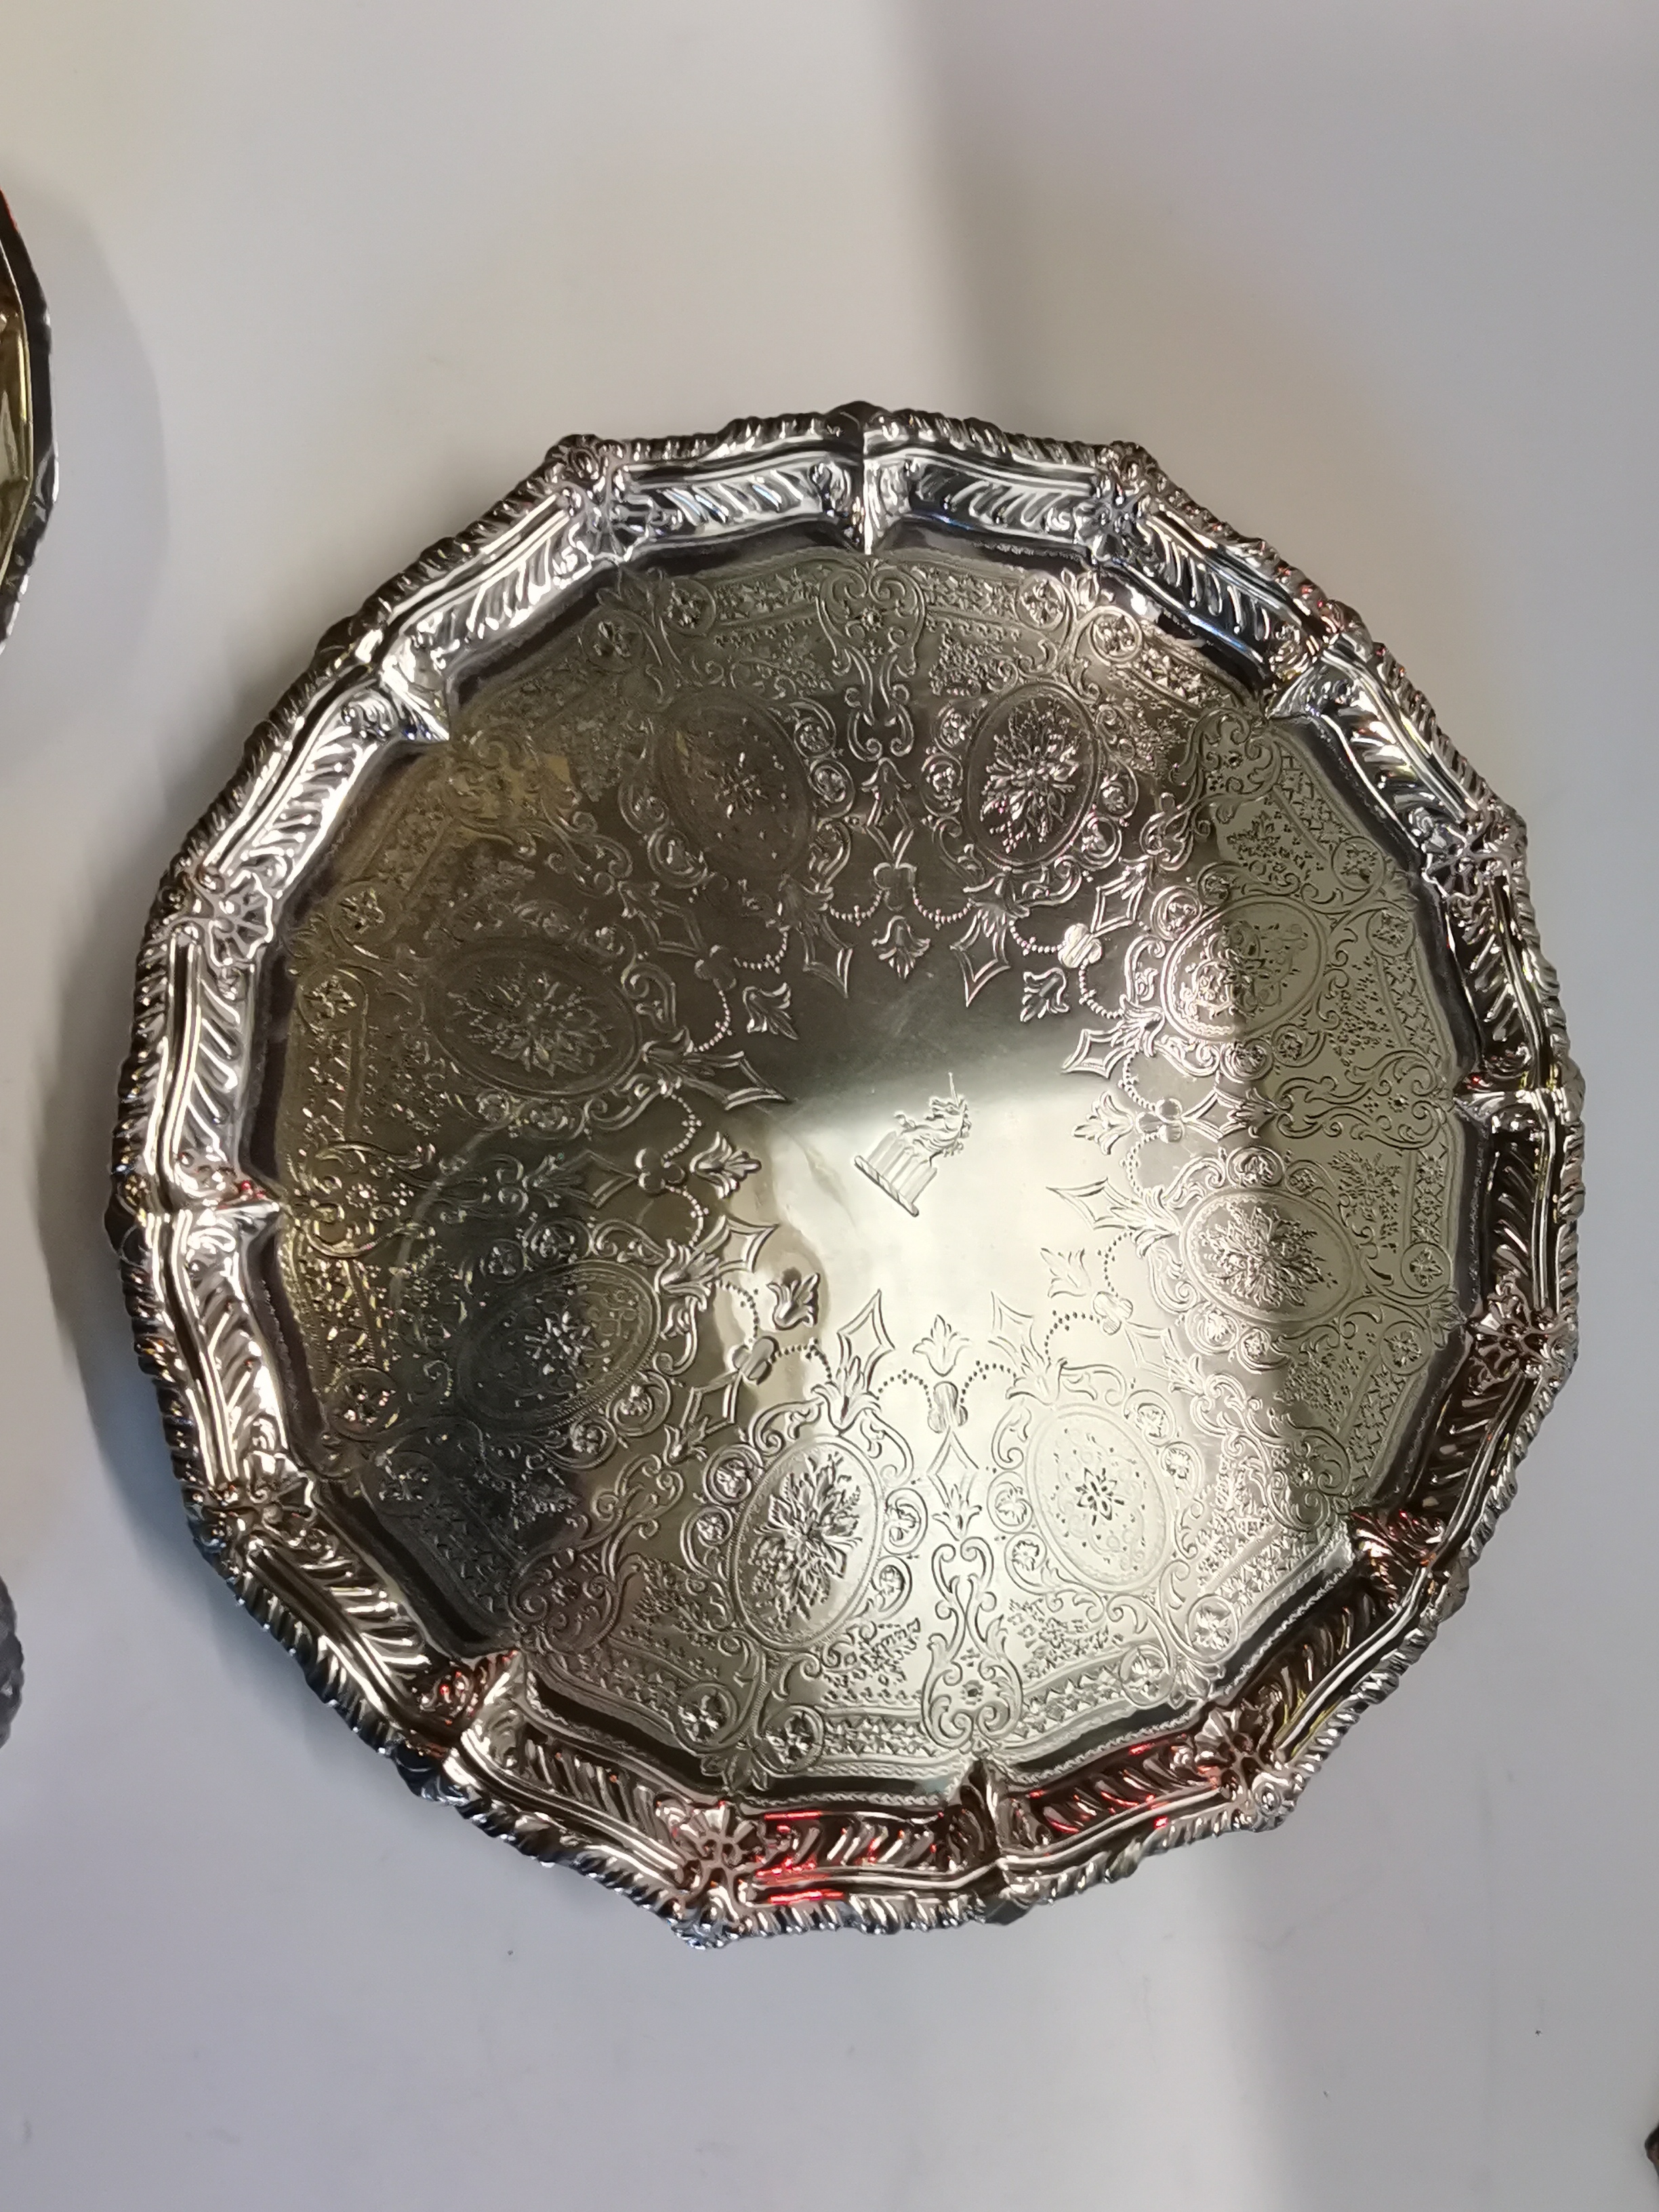 Silver plated salver and silver items - Image 2 of 2